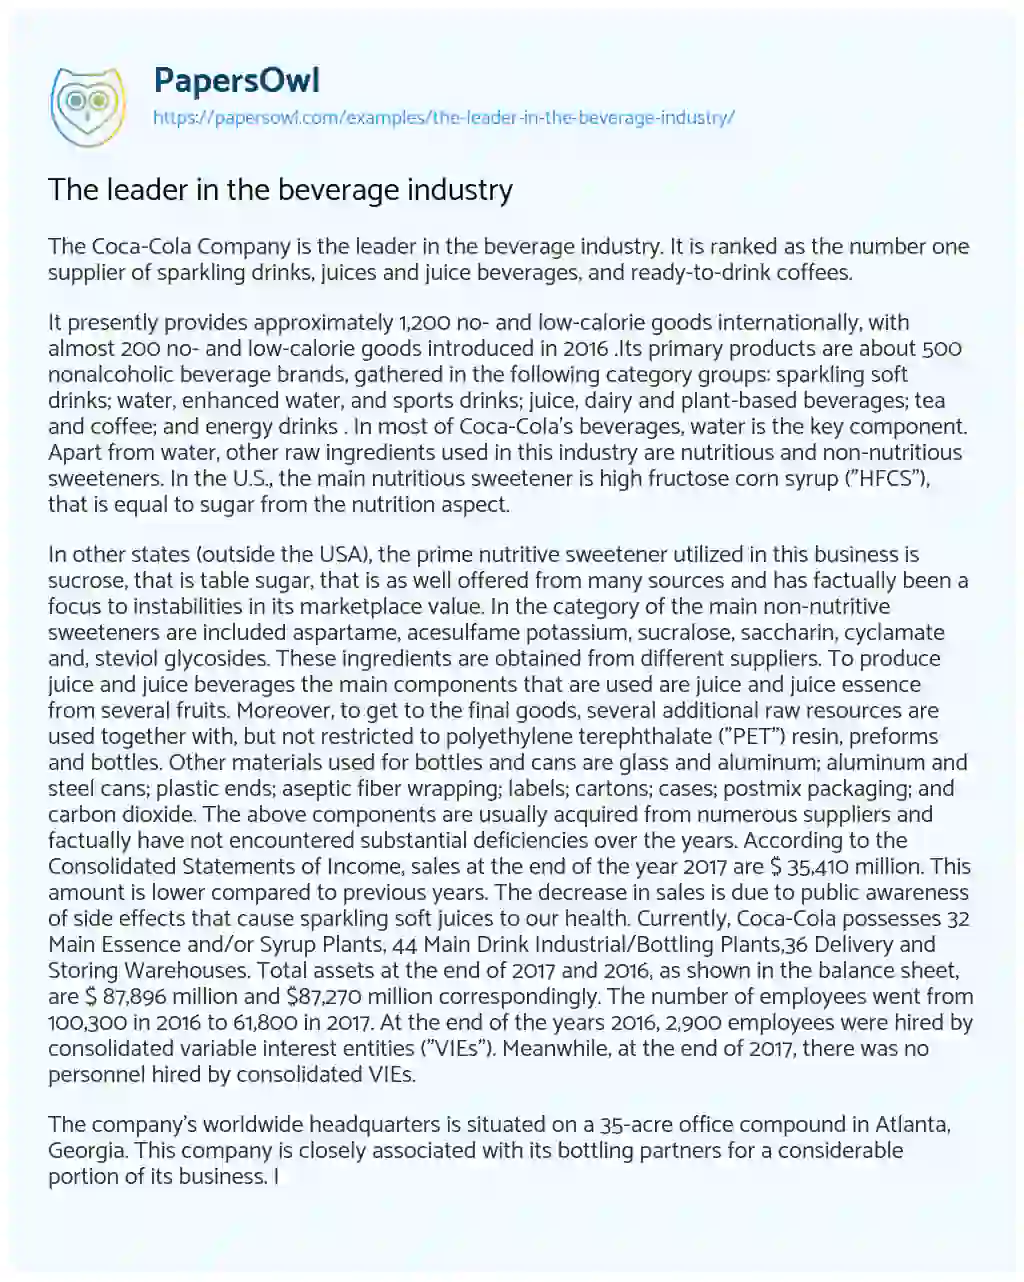 Essay on The Leader in the Beverage Industry